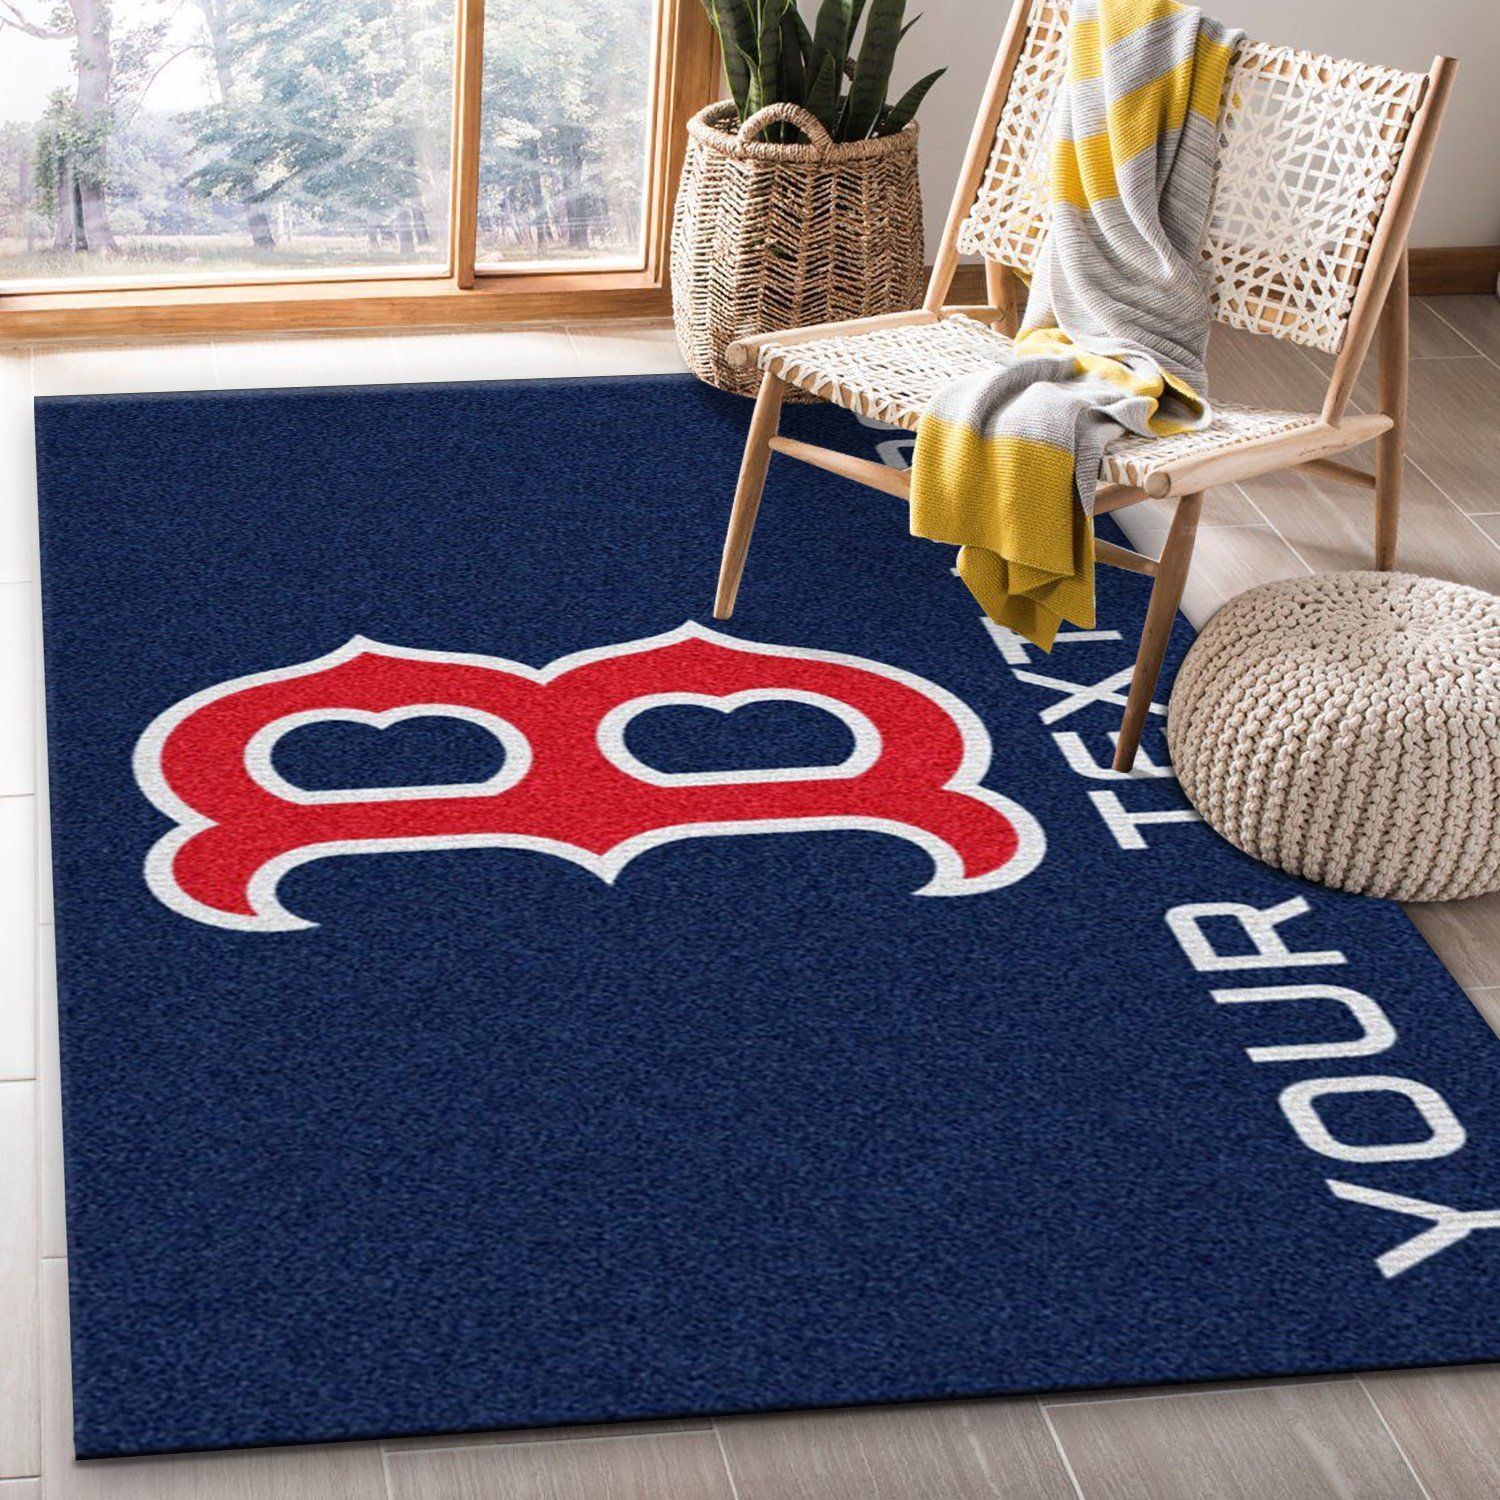 Customizable Boston Red Sox Personalized Accent Rug MLB Team Logos, Living room and bedroom Rug, US Gift Decor - Indoor Outdoor Rugs